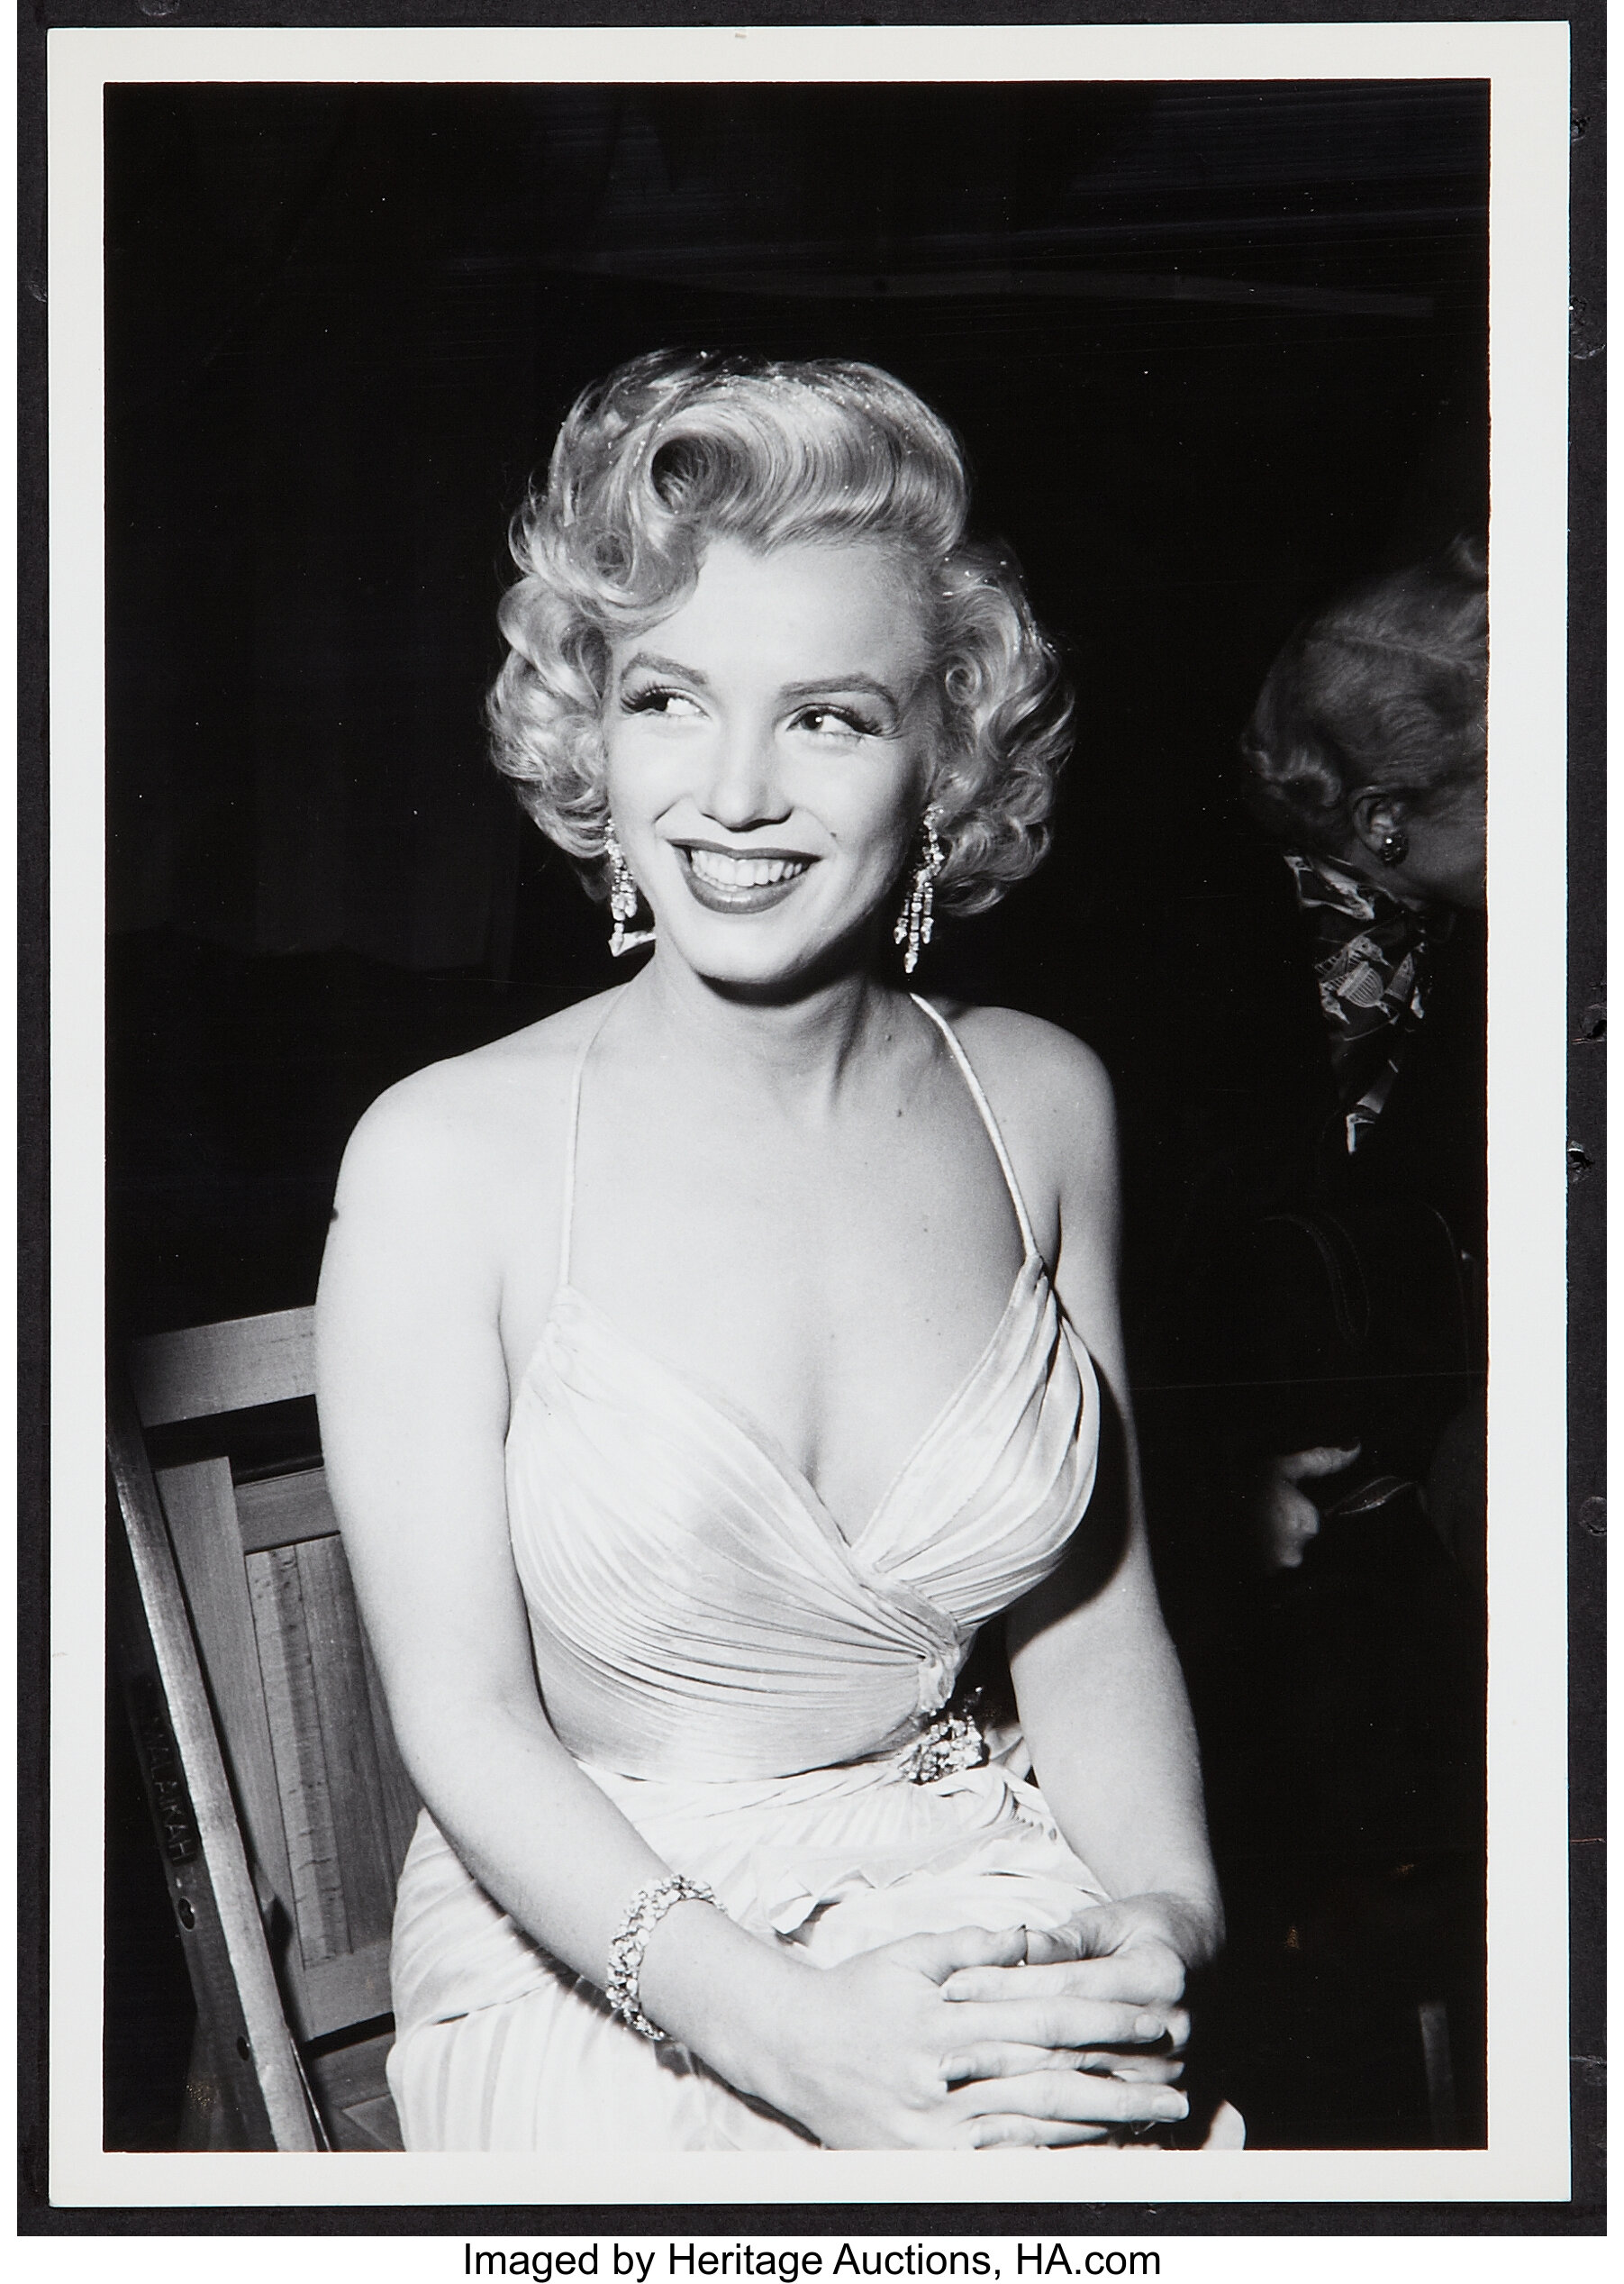  SomethingS Got To Give Marilyn Monroe (With Jeff) 1962 Tm And  Copyright ?20Th Century-Fox Film Corp All Rights Reserved Photo Print (8 x  10): Posters & Prints